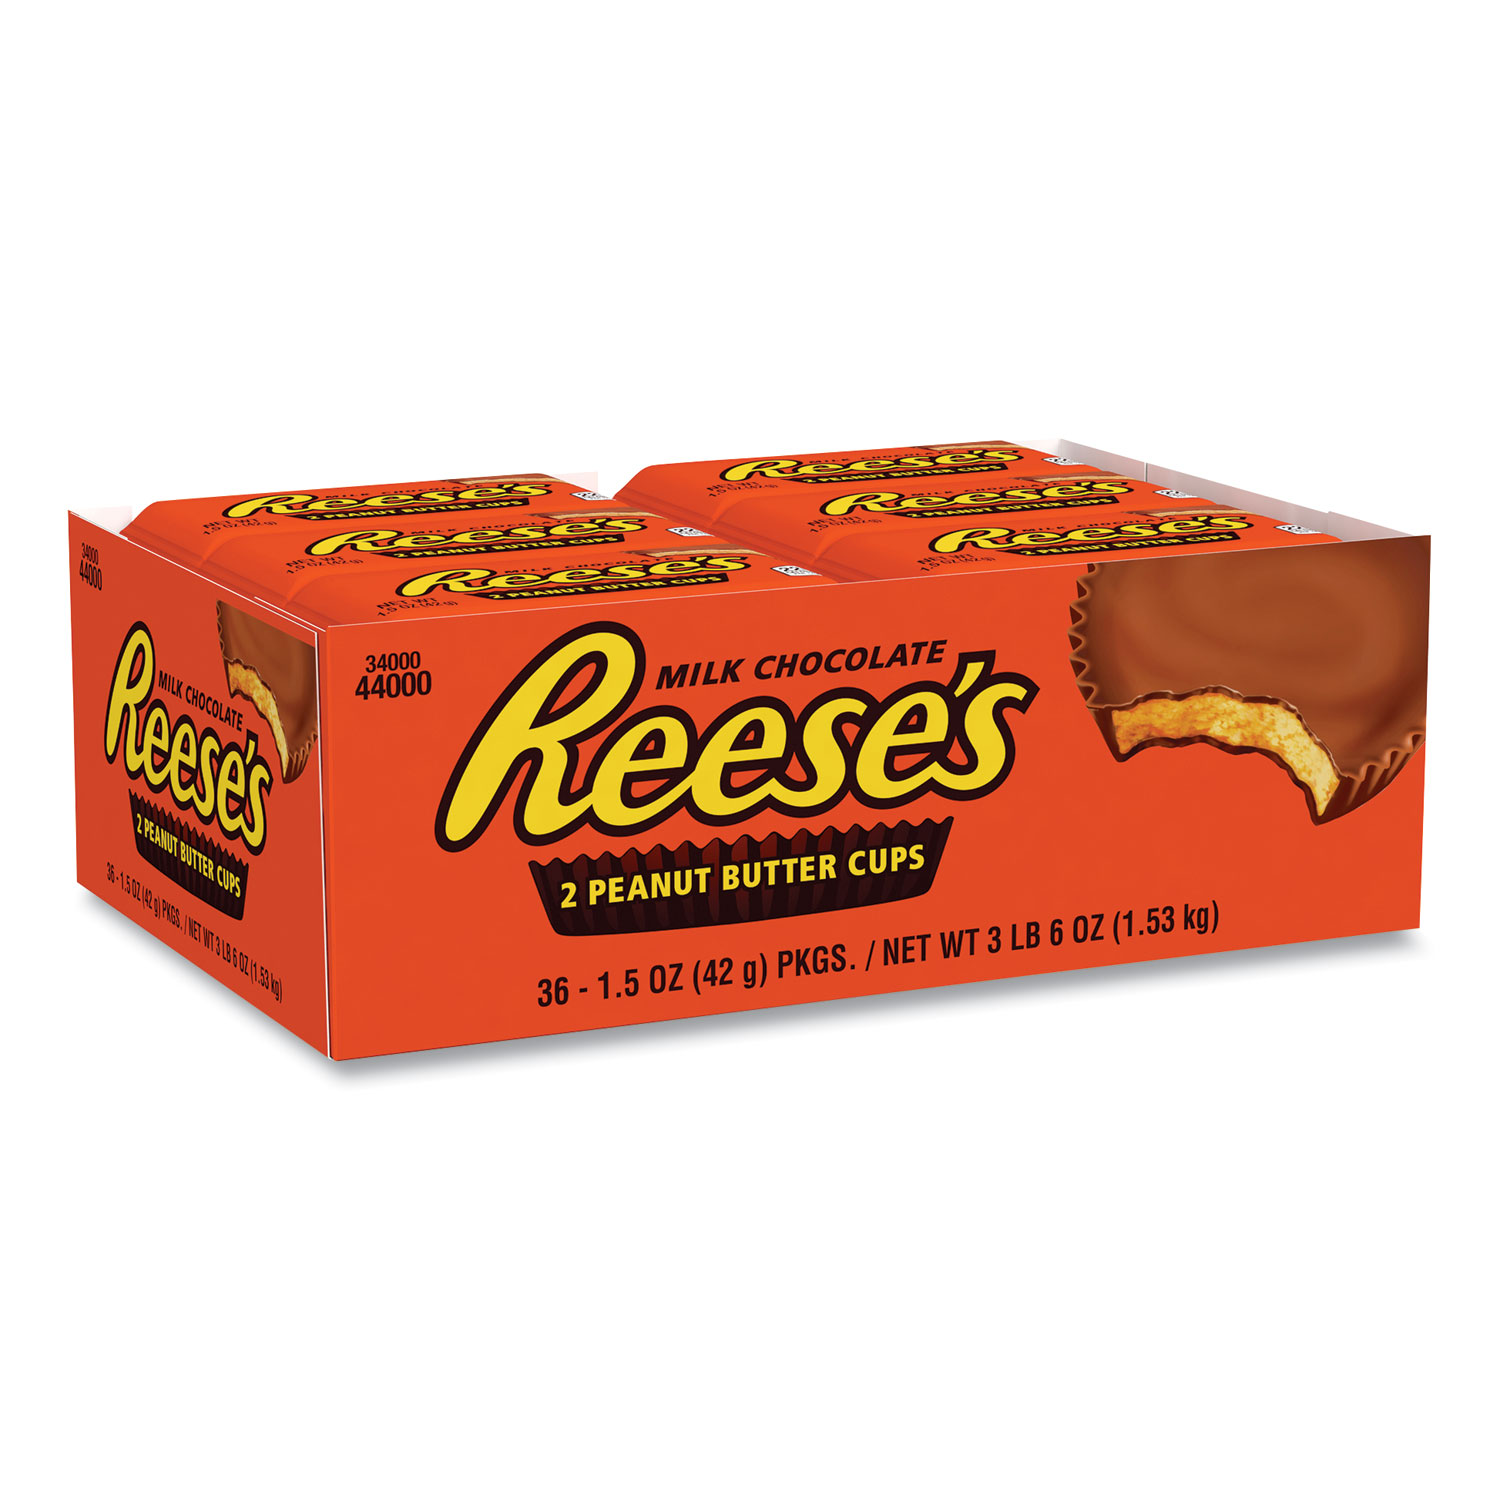  Reese's 44000 Peanut Butter Cups Bar, Full Size, 1.5 oz Bar, 2 Cups/Bar, 36 Bars/Box, Free Delivery in 1-4 Business Days (GRR20900149) 